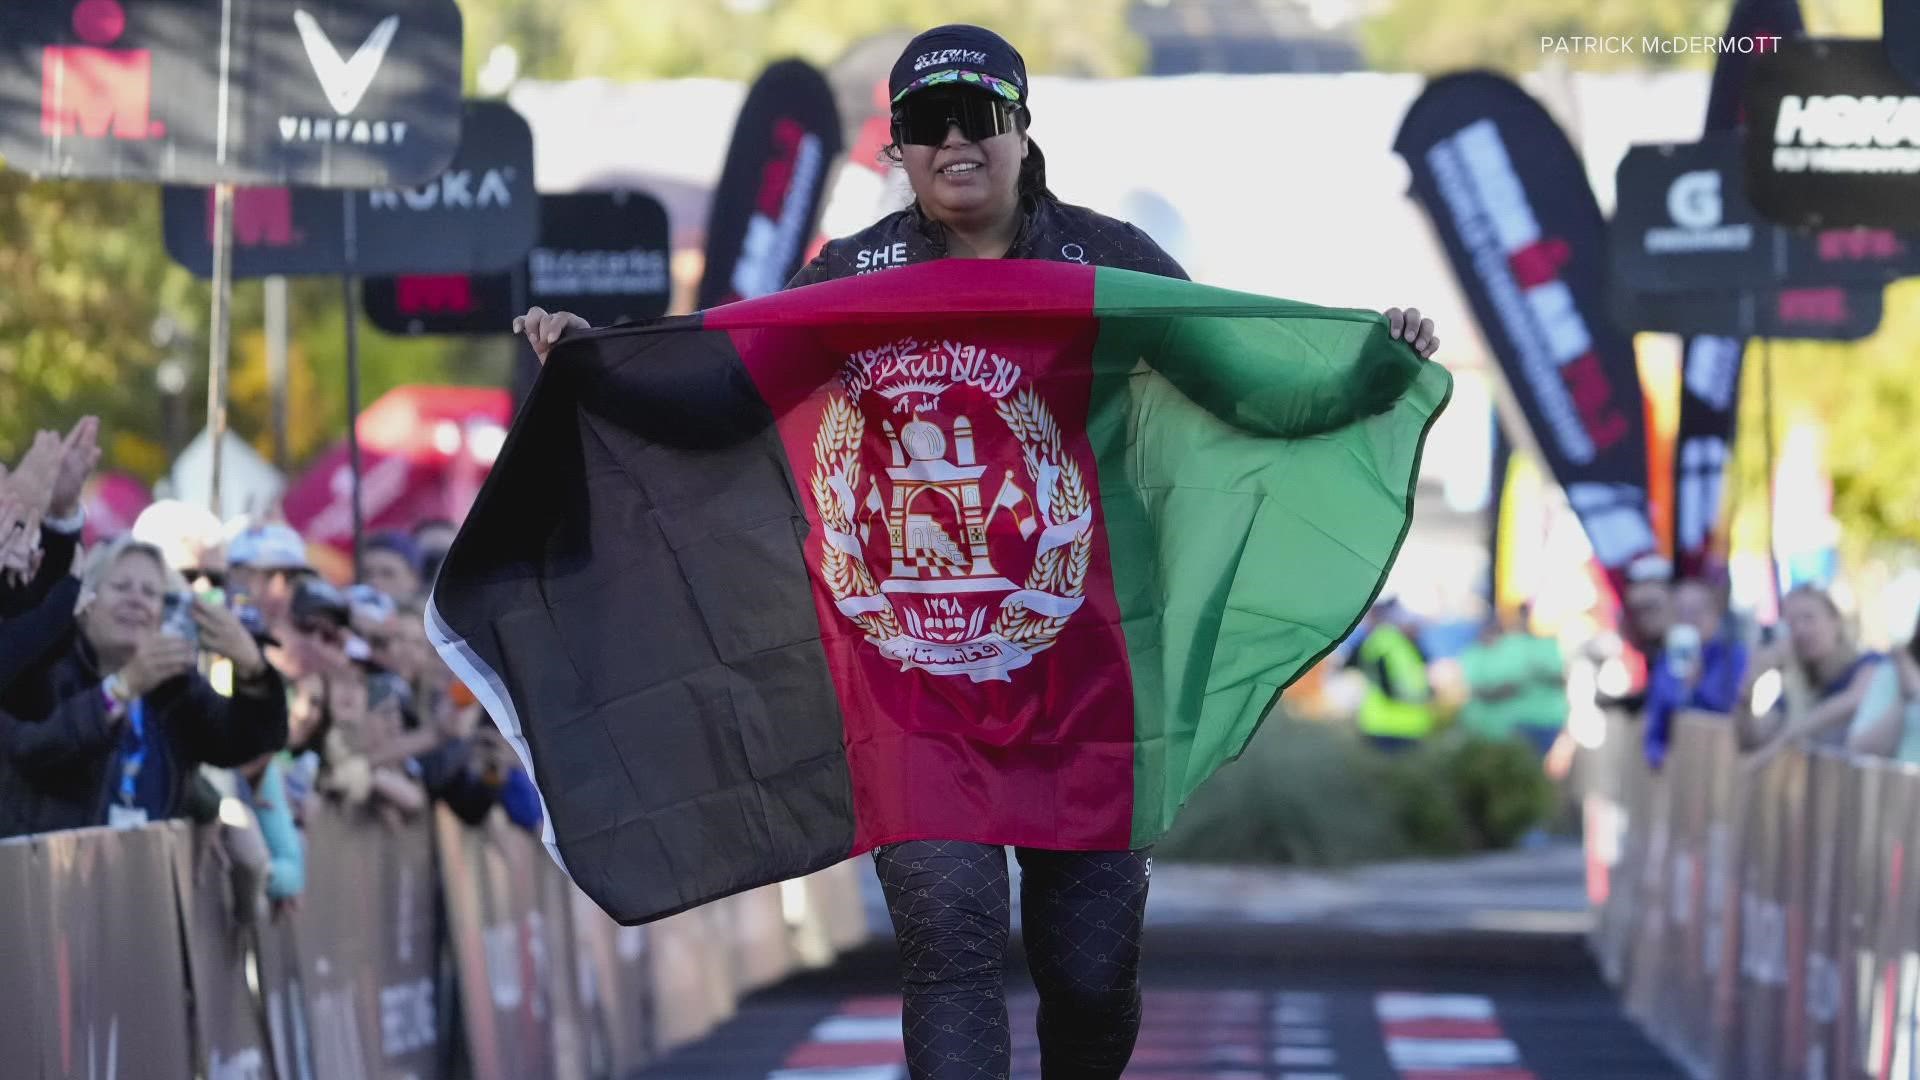 Zeinab Rezaie is the first woman from Afghanistan to race and finish the IRONMAN World Championship.